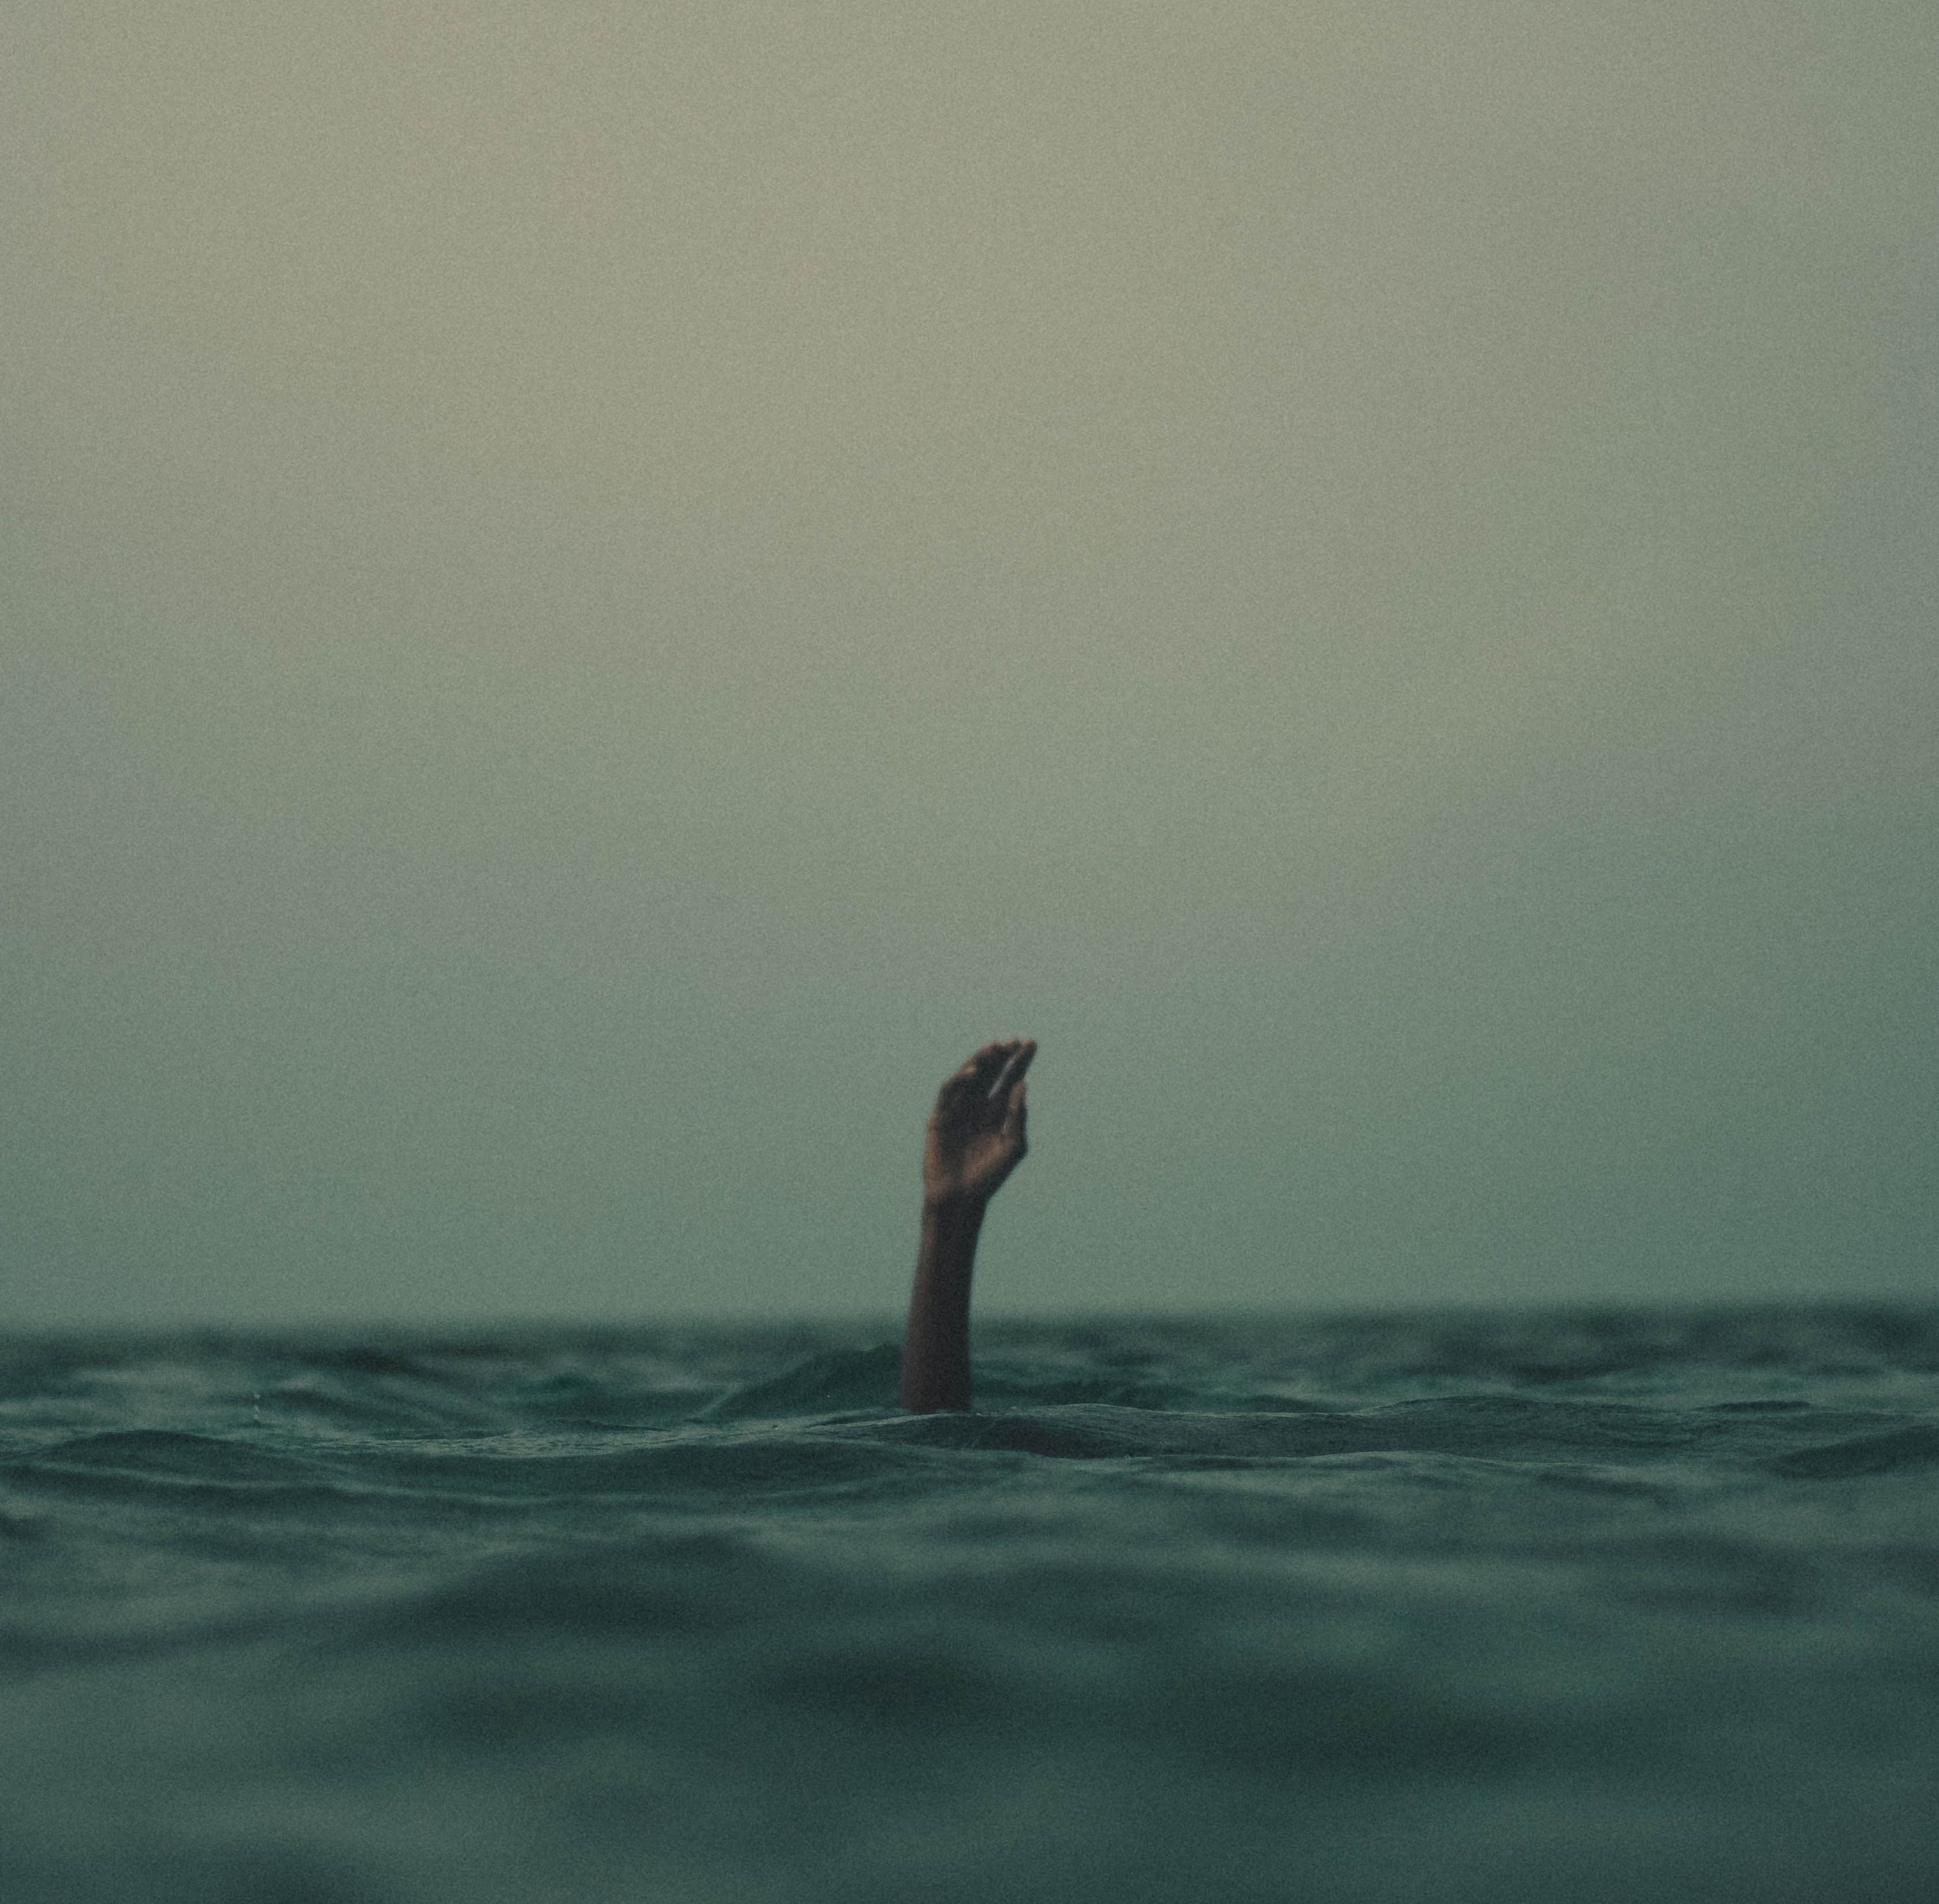 3357x3297 #concept, #wave, #gritty, #hand, #lost, #drown, #Free image, #arm, #conceptual, #water, #dark, #horizon, #help, #sinking, #sea, #going down, #ocean, #grainy. Mocah.org HD Wallpaper